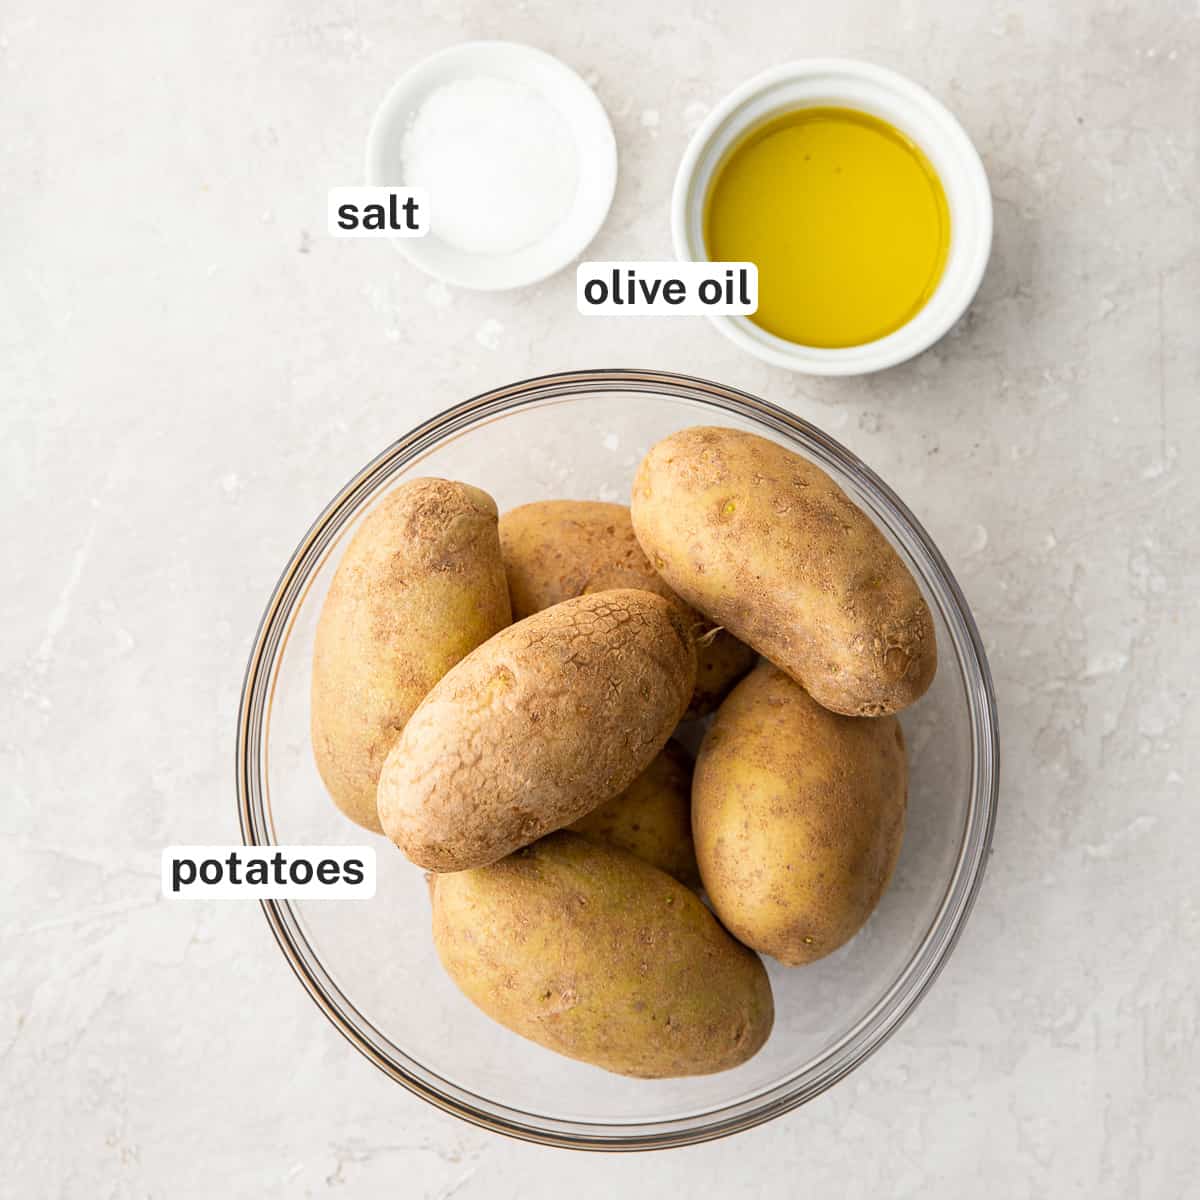 Potatoes, salt, and olive oil in 3 bowls.